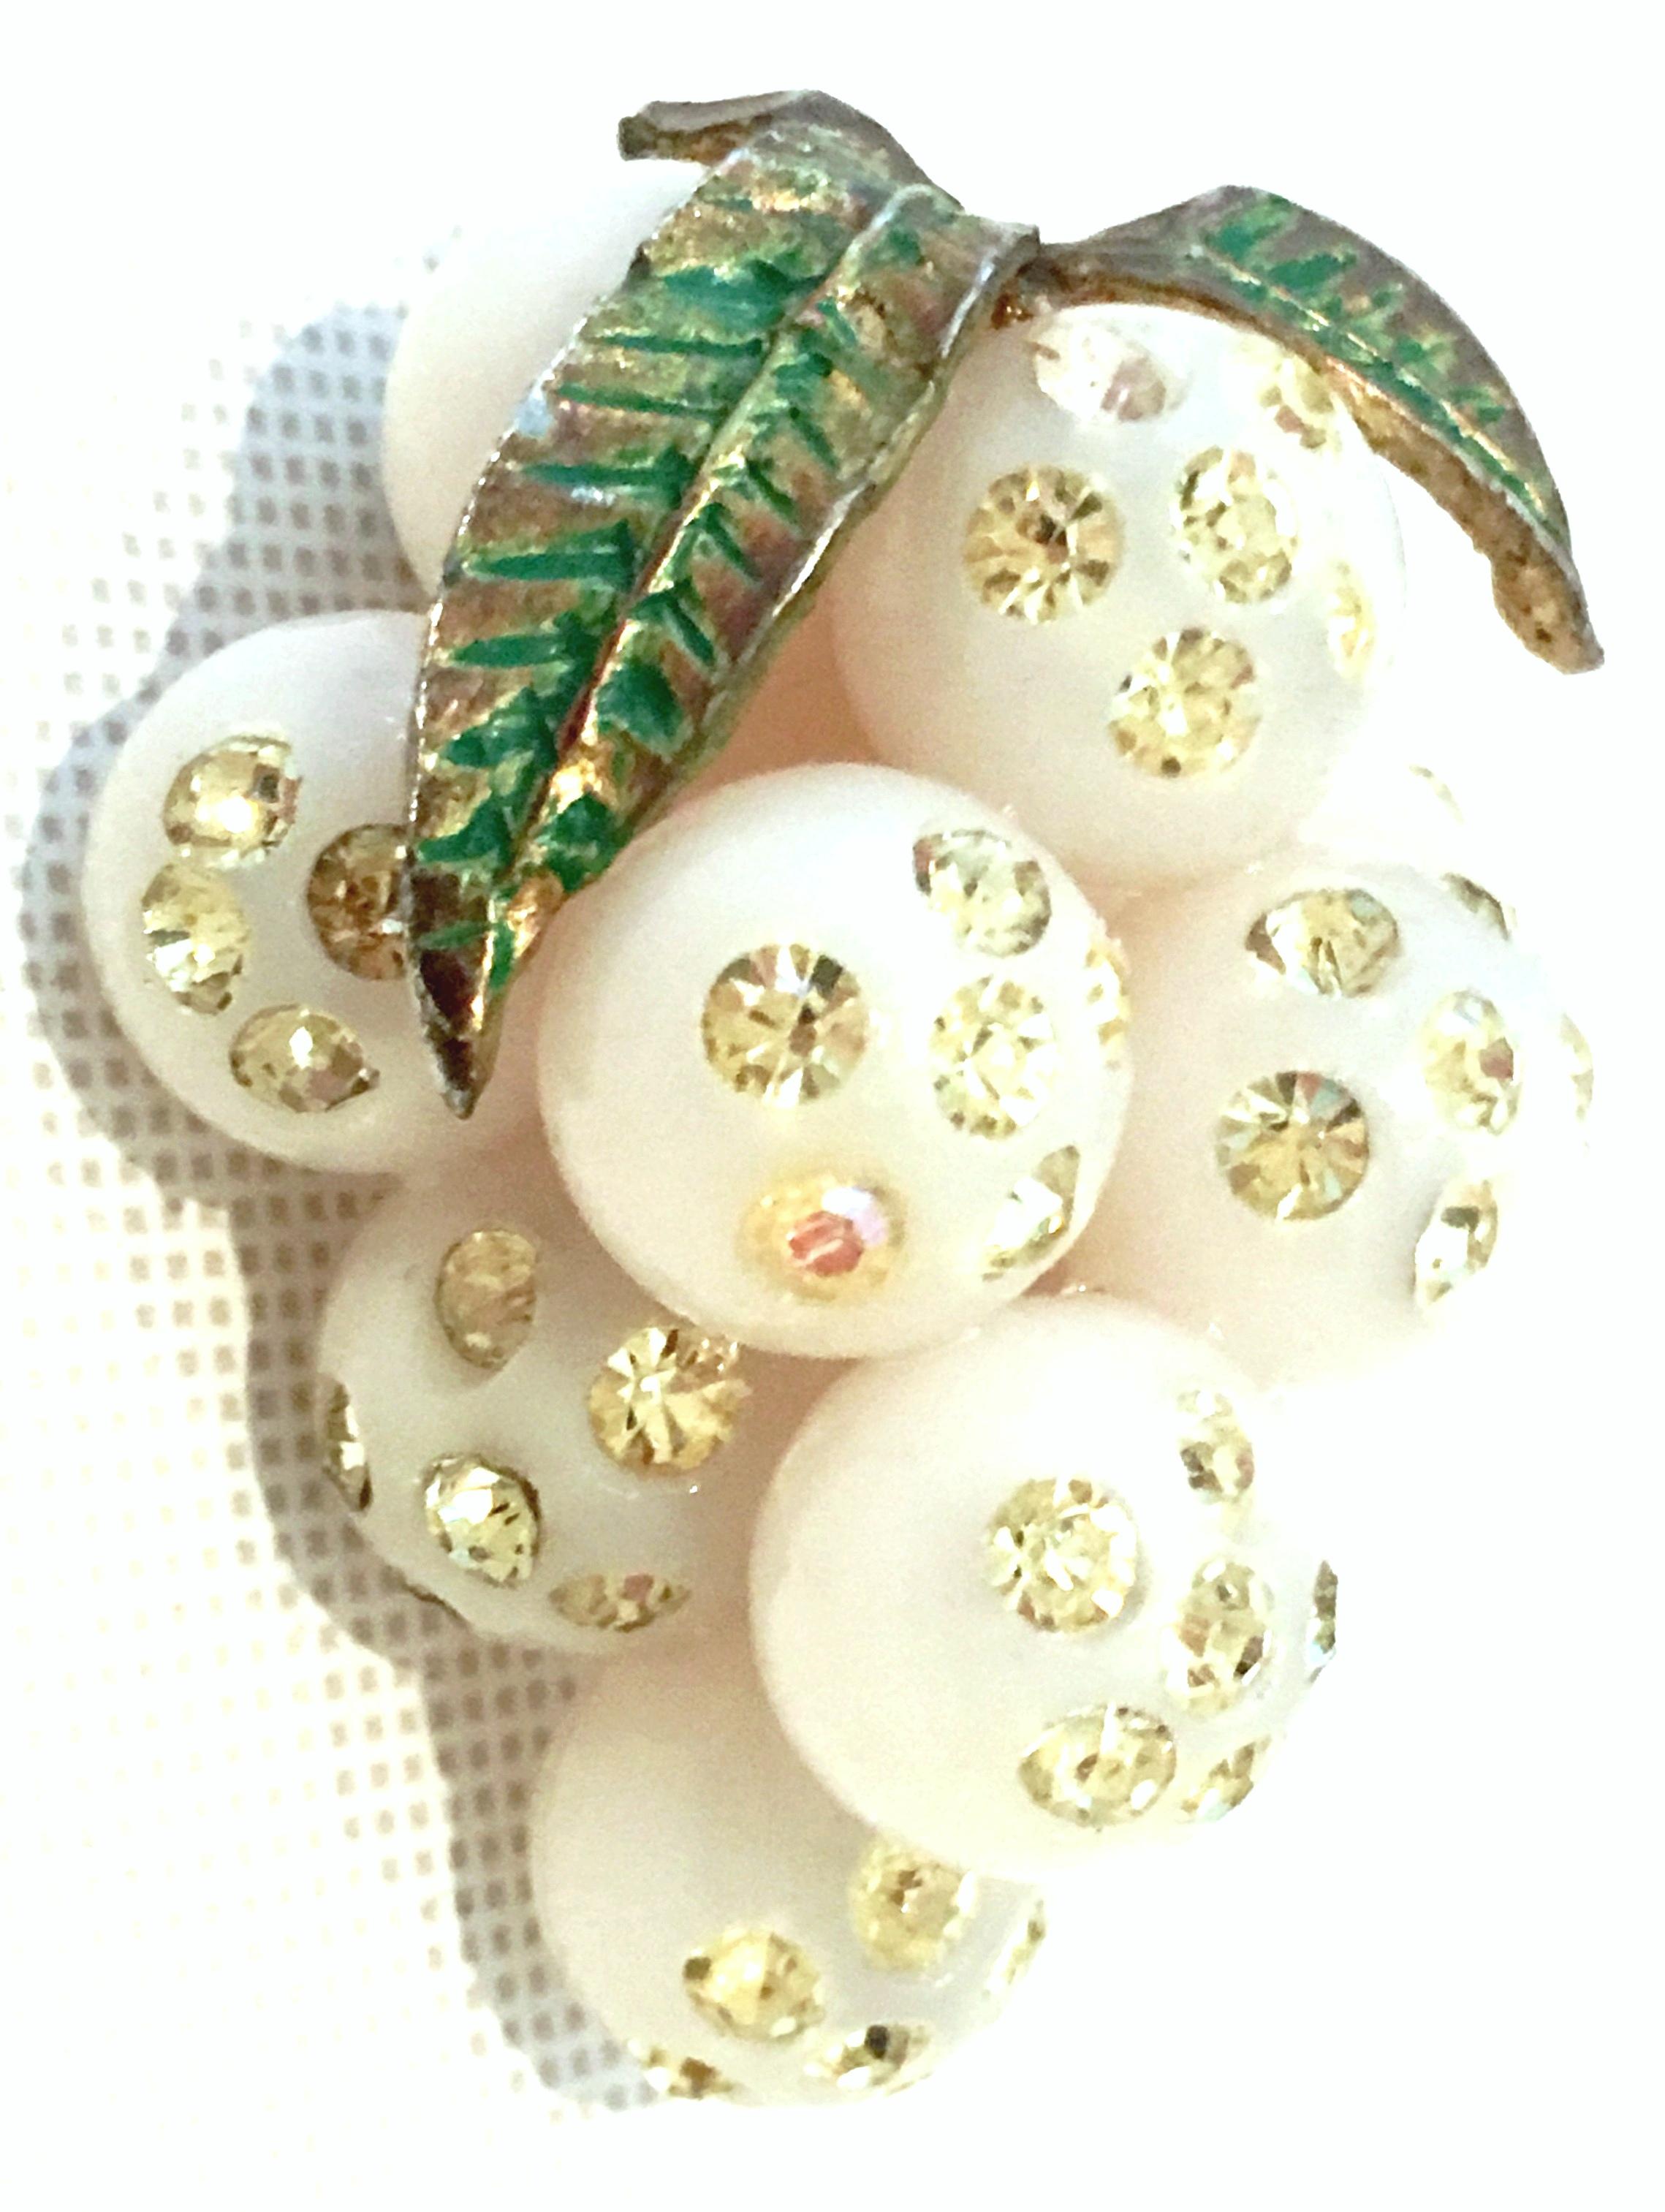 Mid-20th Century Art Nouveau Gold, Lucite & Austrian Crystal Dimensional Grape Bunch Brooch.
This rare and pristine sculptural Lucite grape bunch brooch features antique white Lucite grapes with brilliant canary yellow Austrian crystal stones and